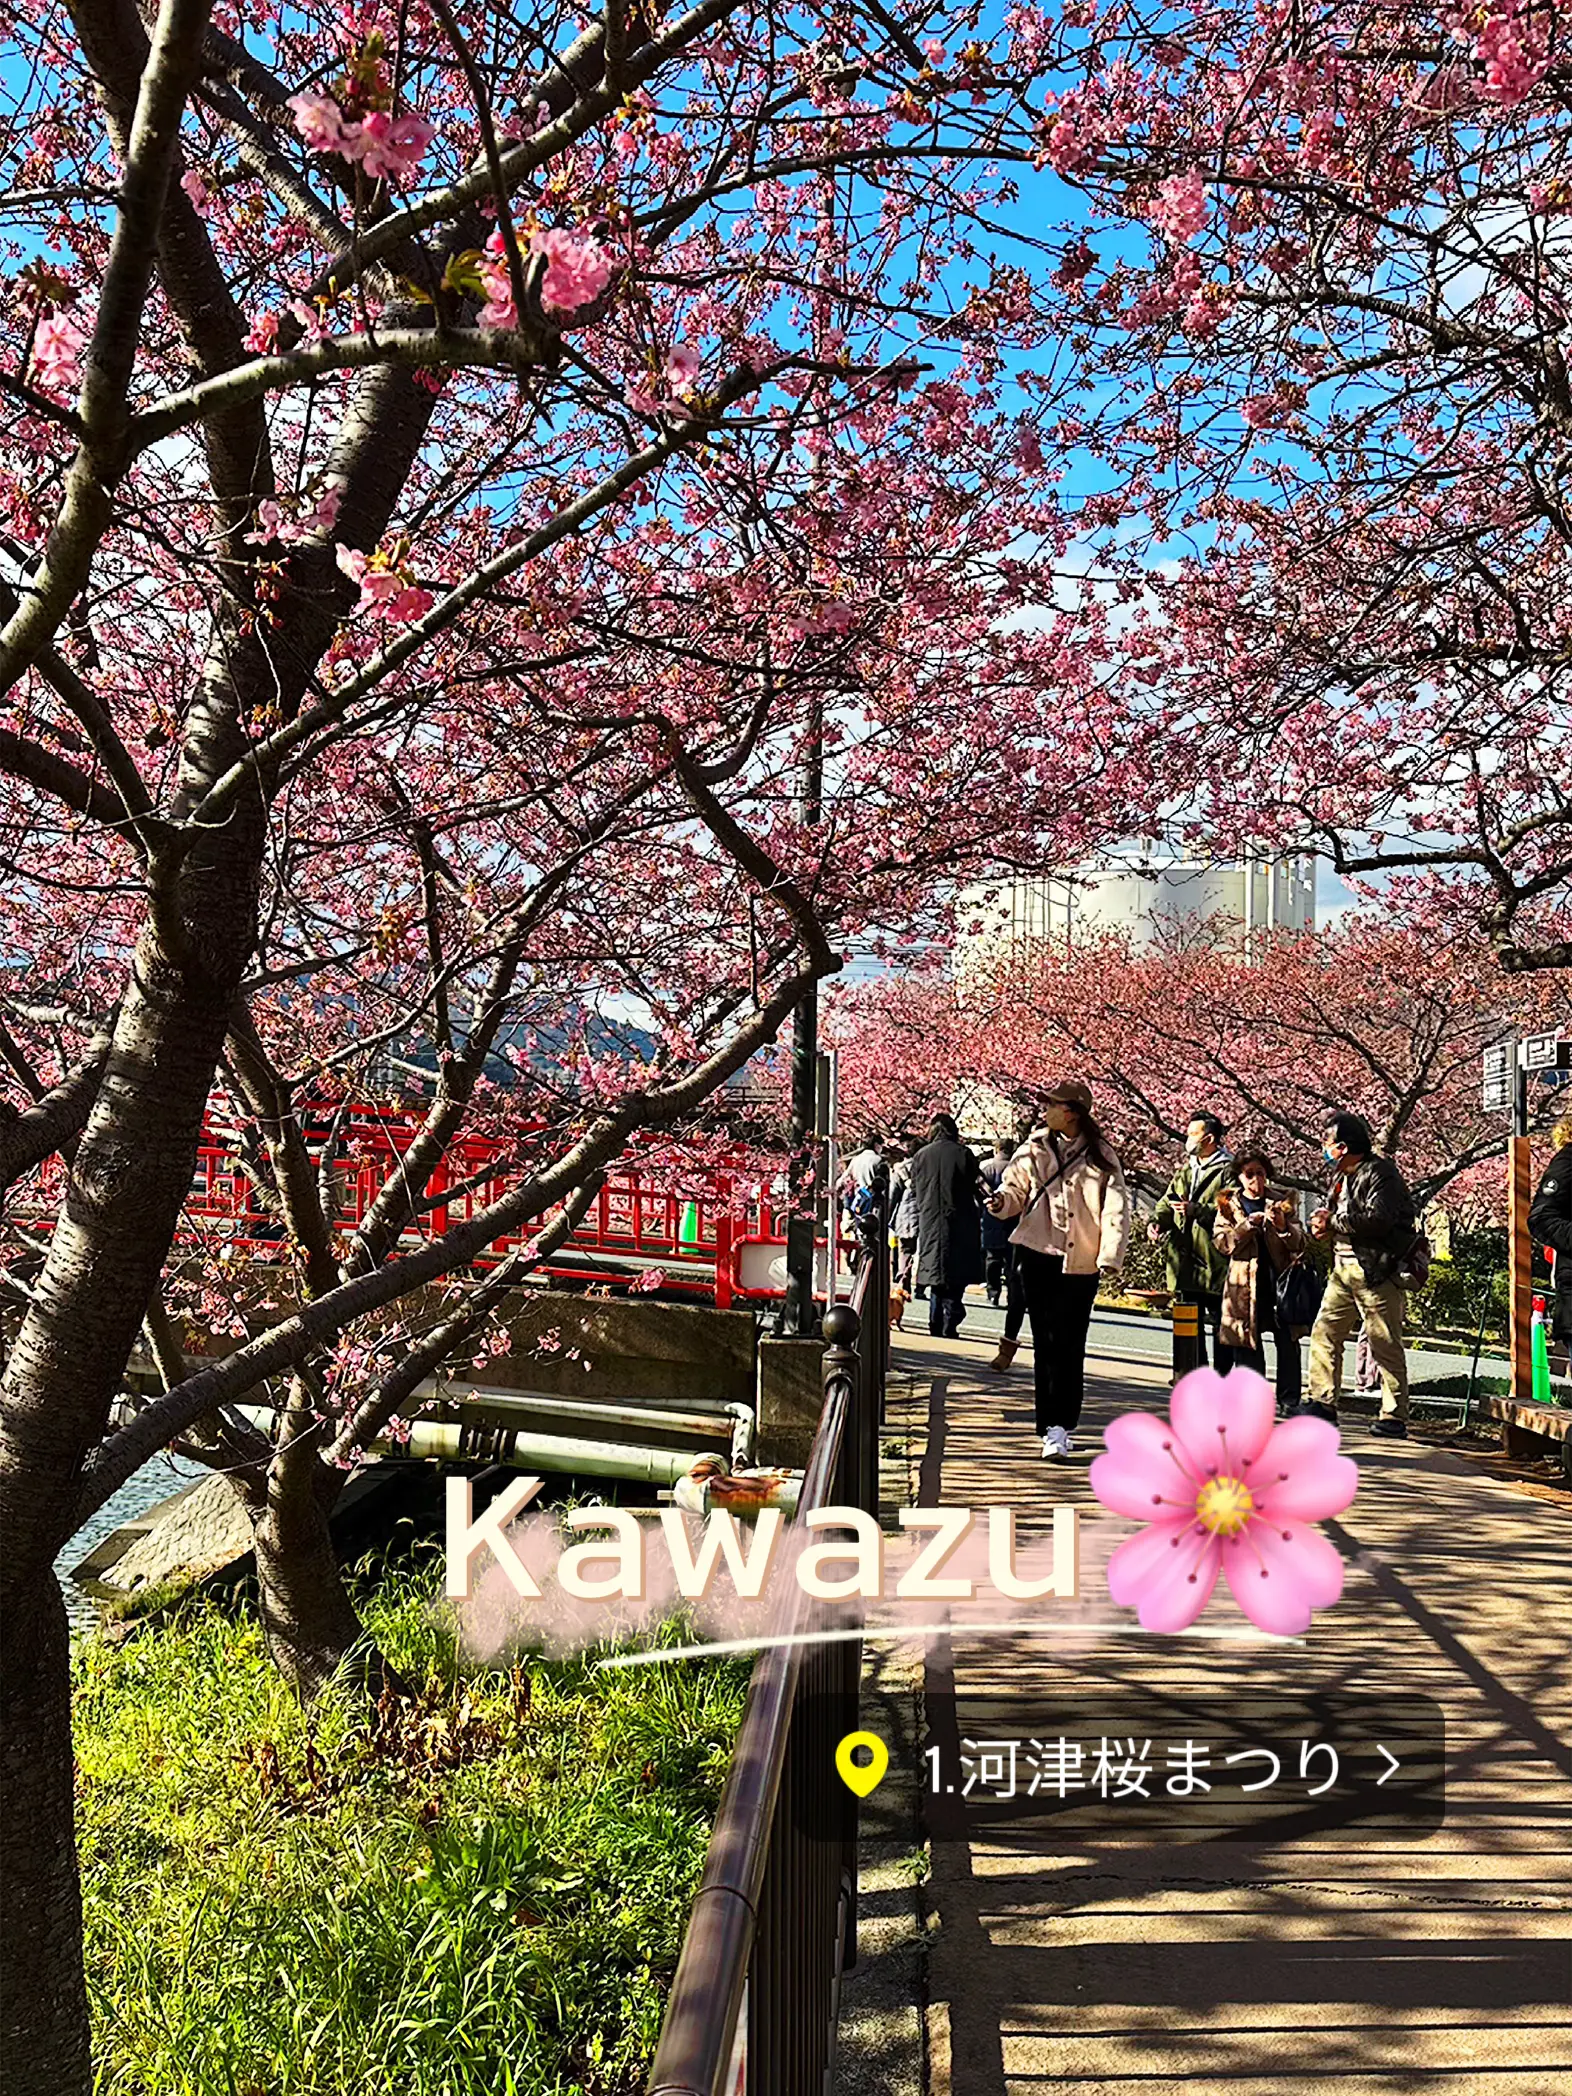 Feel the early spring with early blooming cherry blossoms